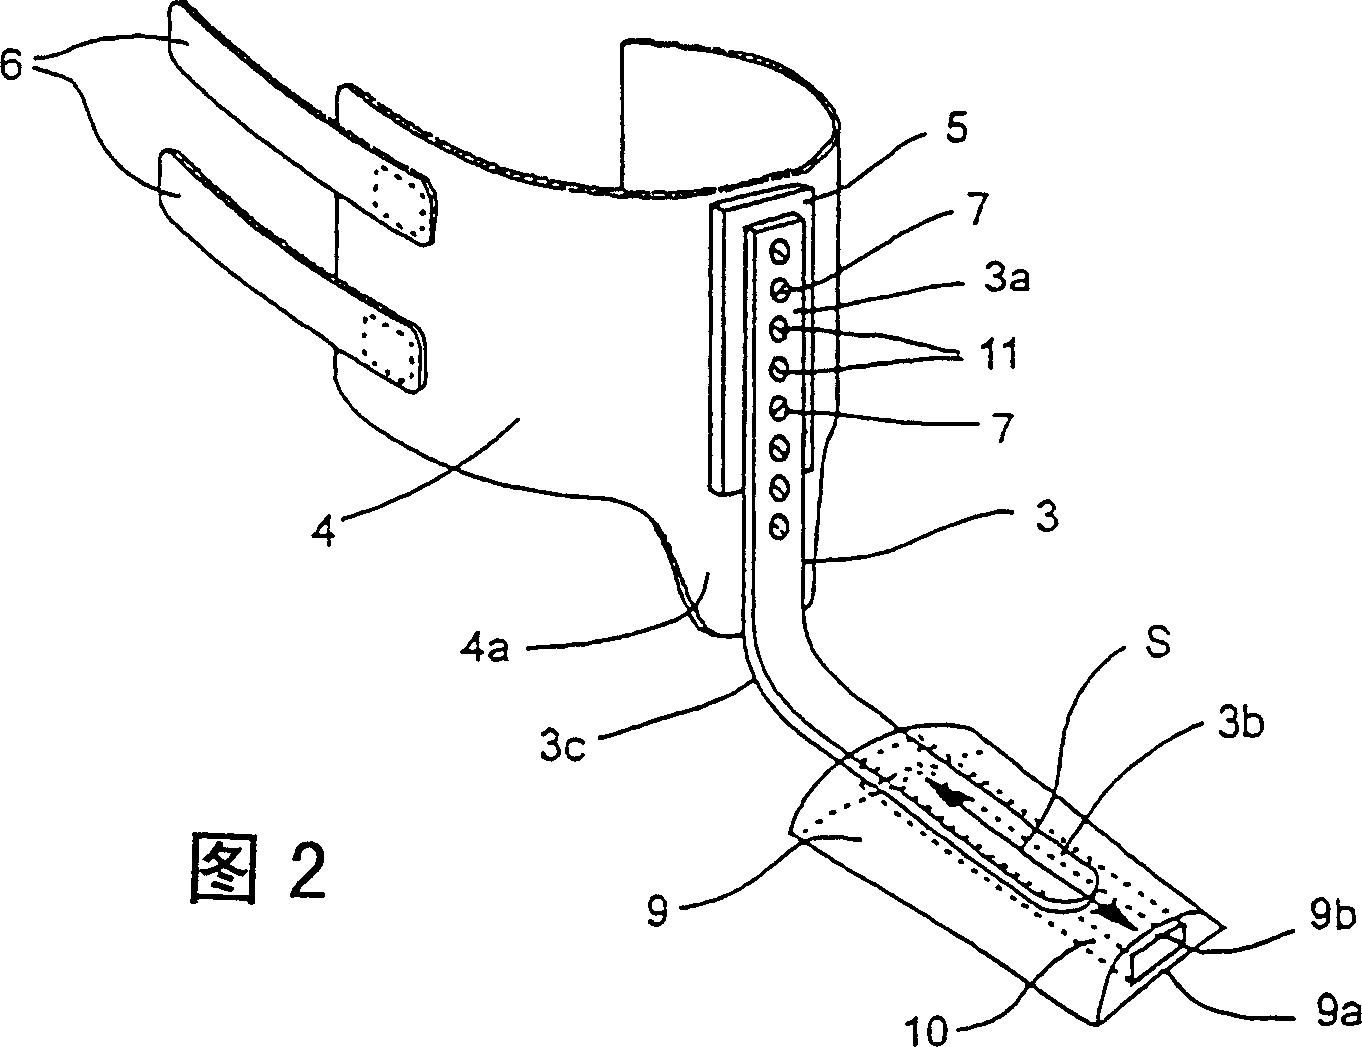 Device for drop foot